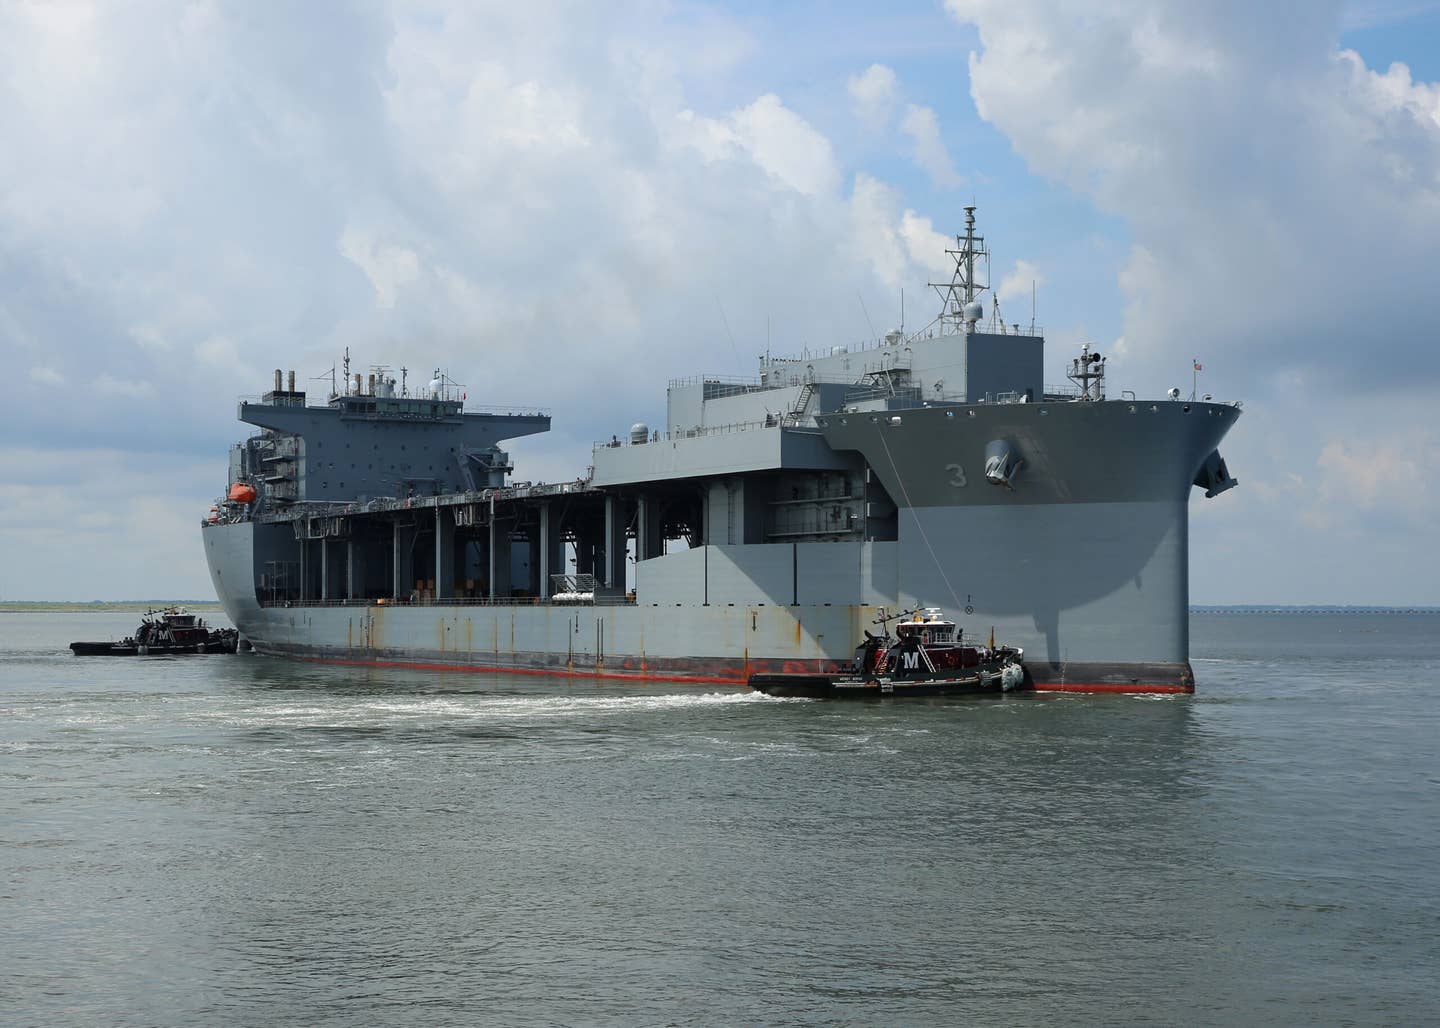 The SEALs who went missing during a Jan. 11 interdiction were operating from the Military Sealift Command expeditionary mobile base USS <em>Lewis B. Puller</em>. (U.S. Navy photo by Bill Mesta/Released)